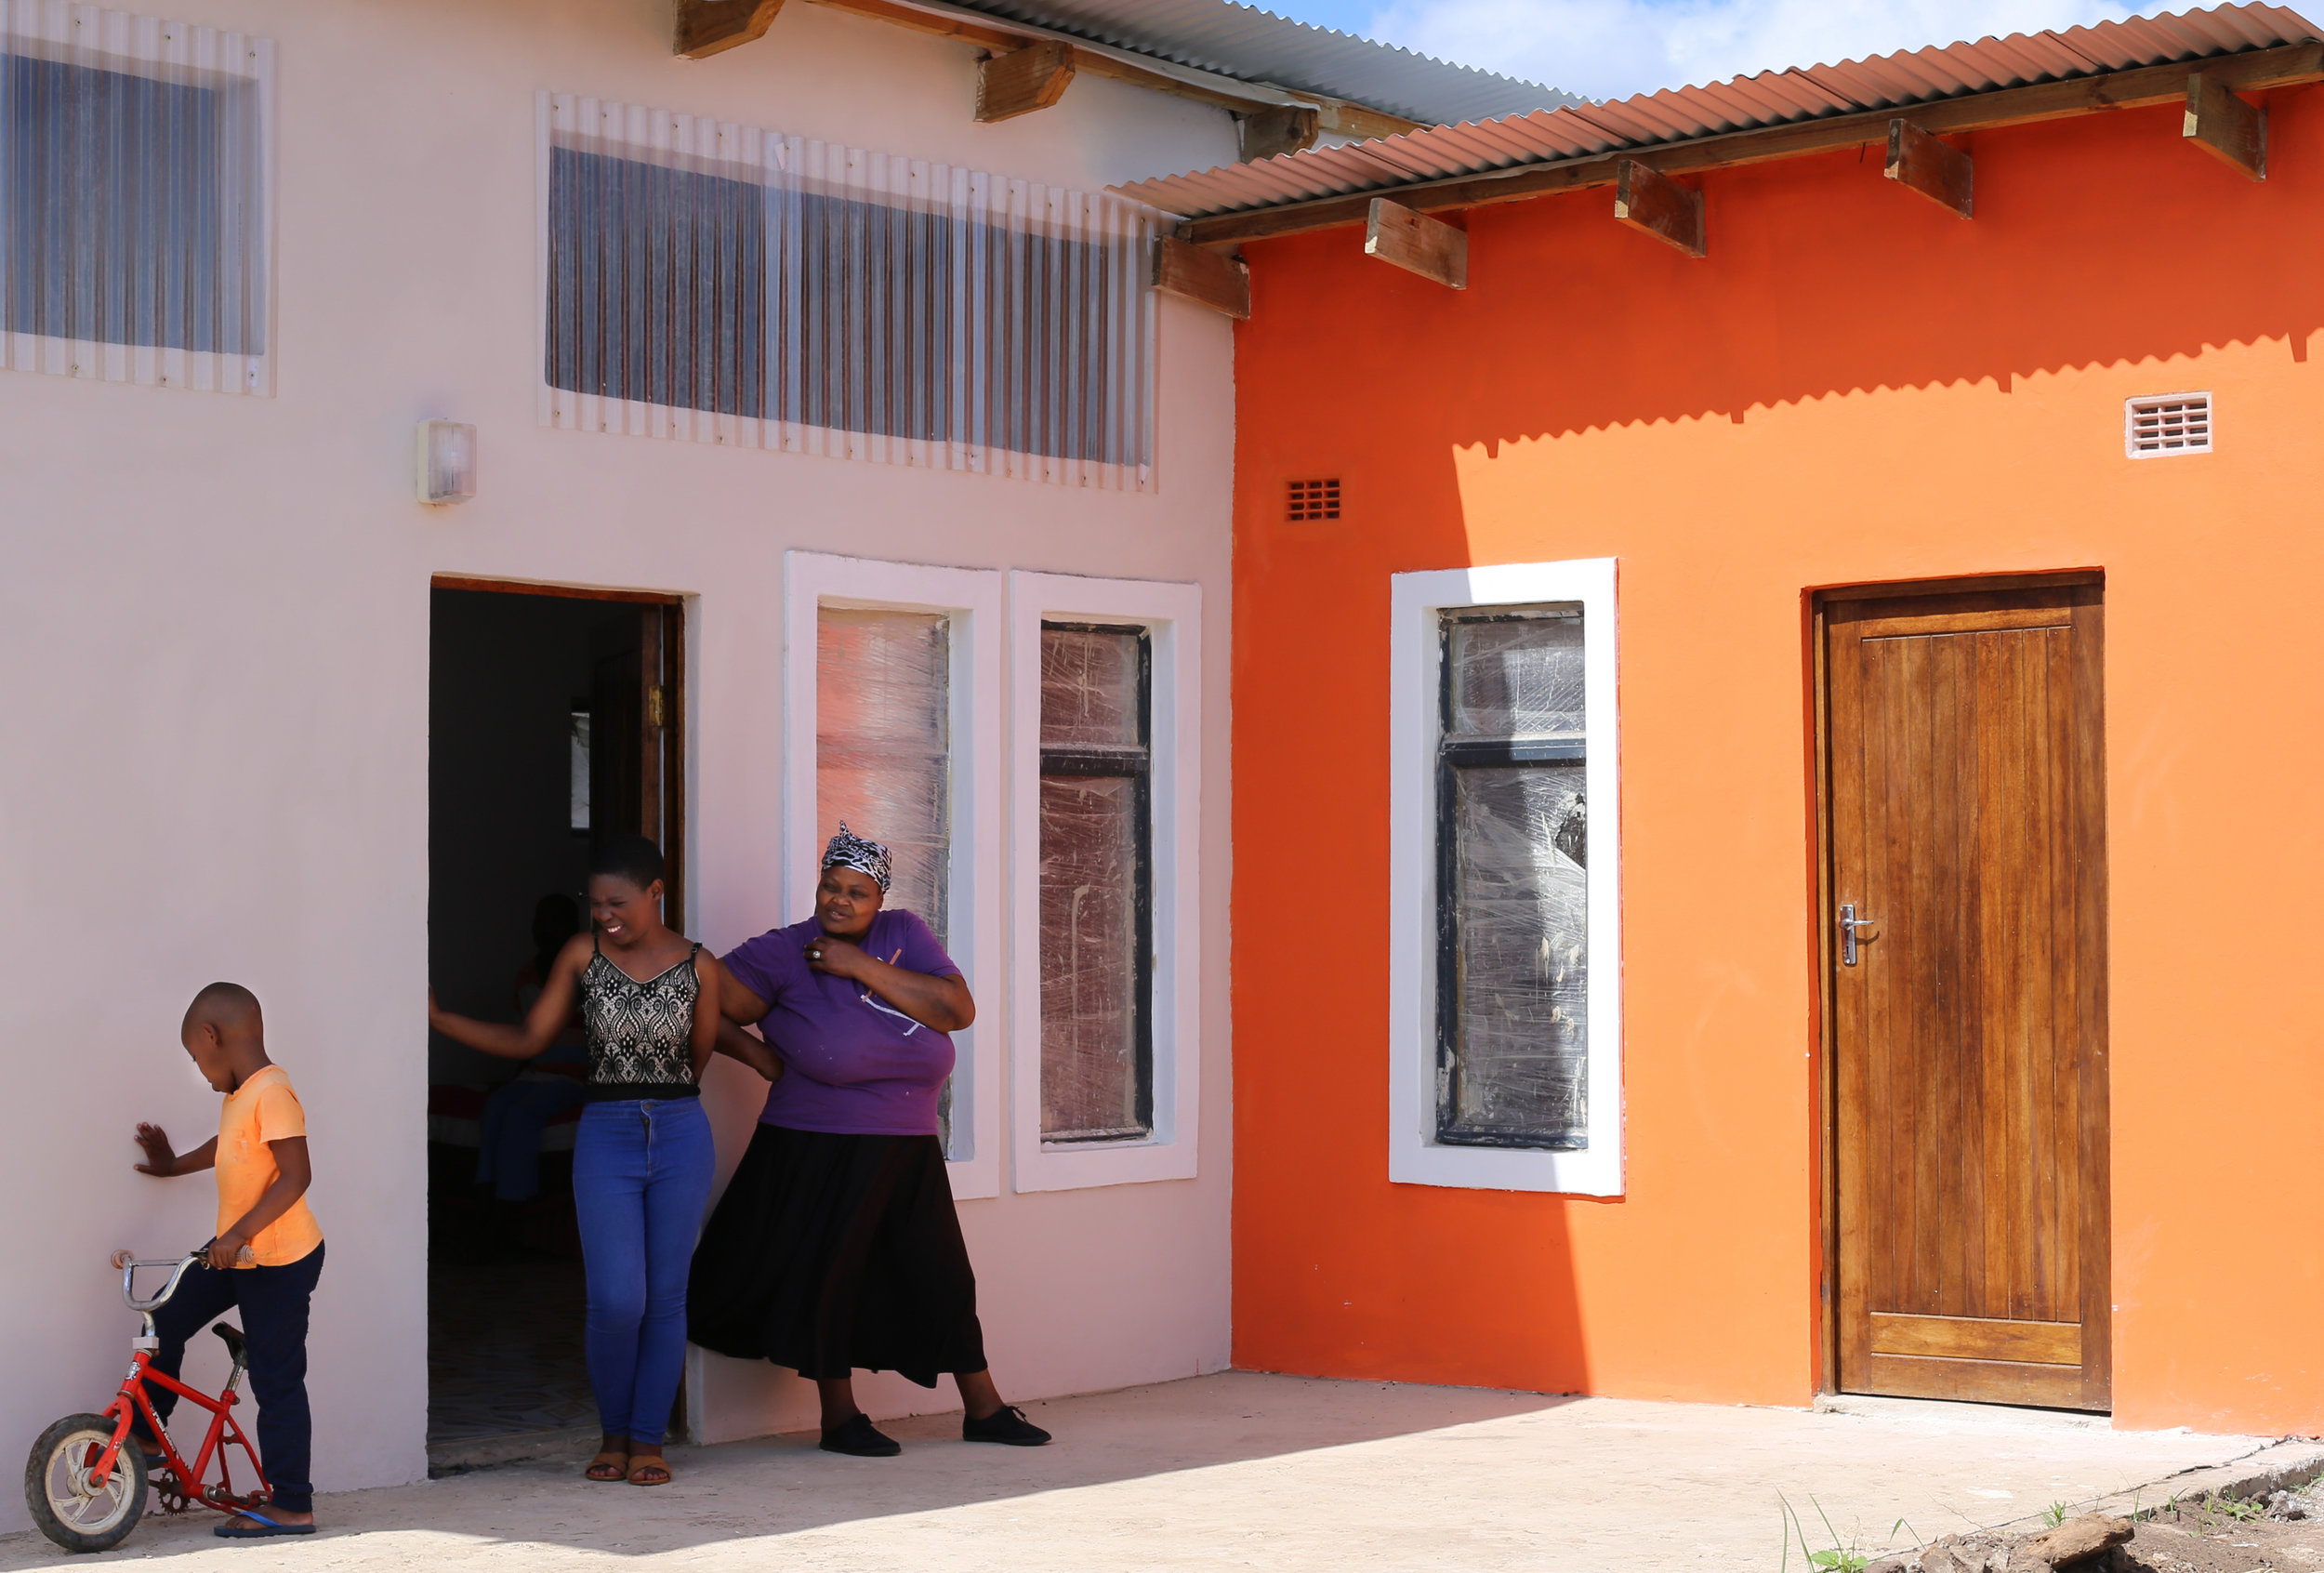 New shop-house for a disabled family, Umbumbulu, South Africa